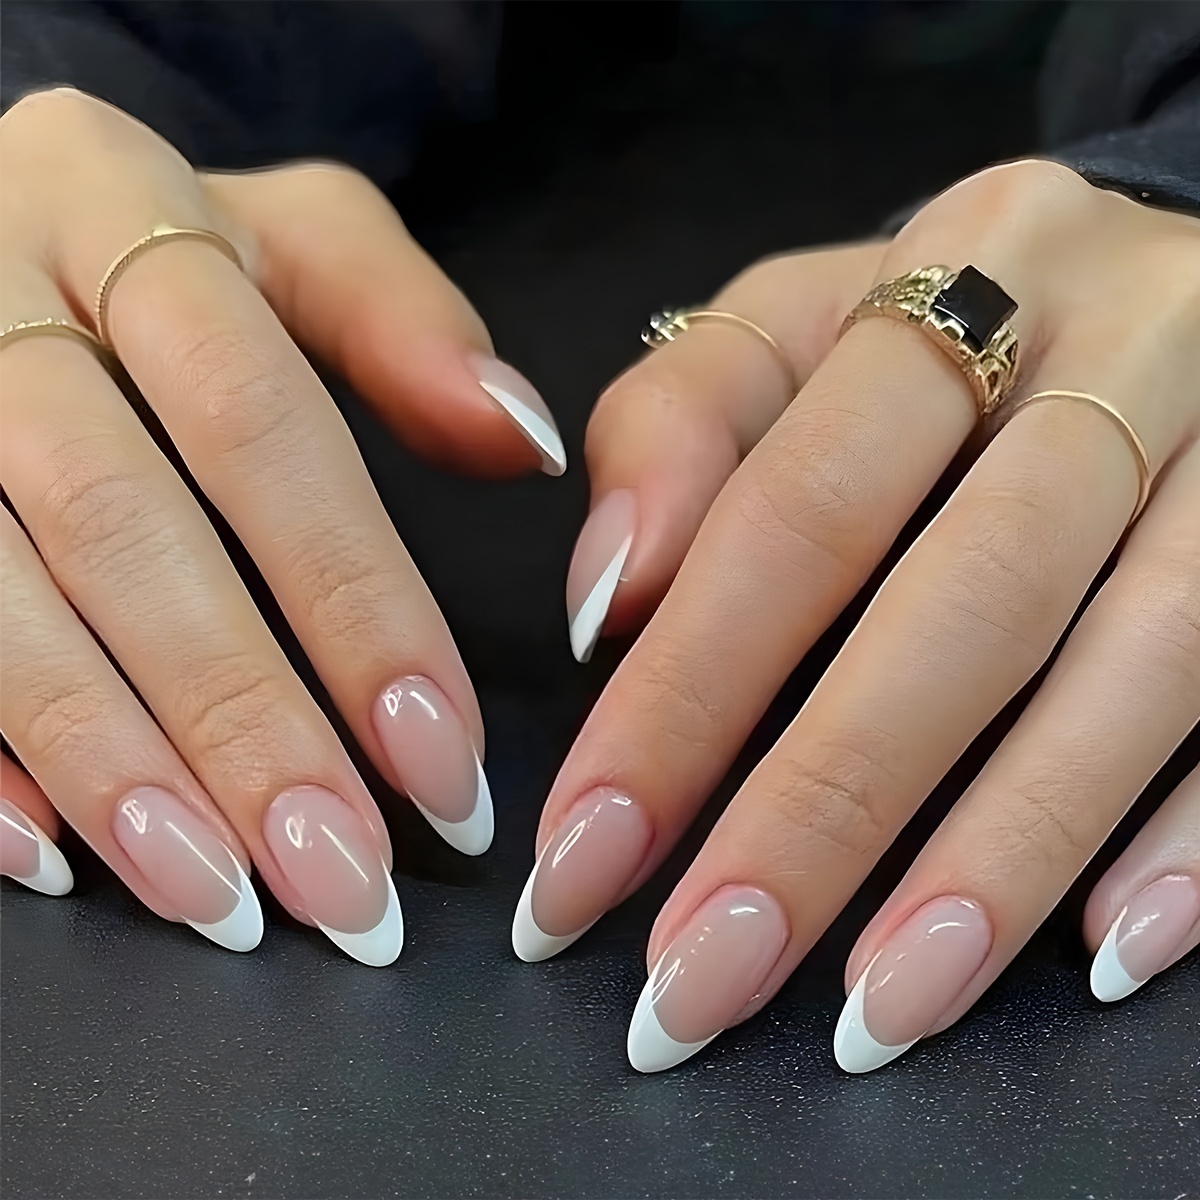 

24pcs Glossy Nude Almond Fake Nails, Medium Long White French Tip Press On Nails, Minimalist Style False Nails For Women Girls - Daily Wear